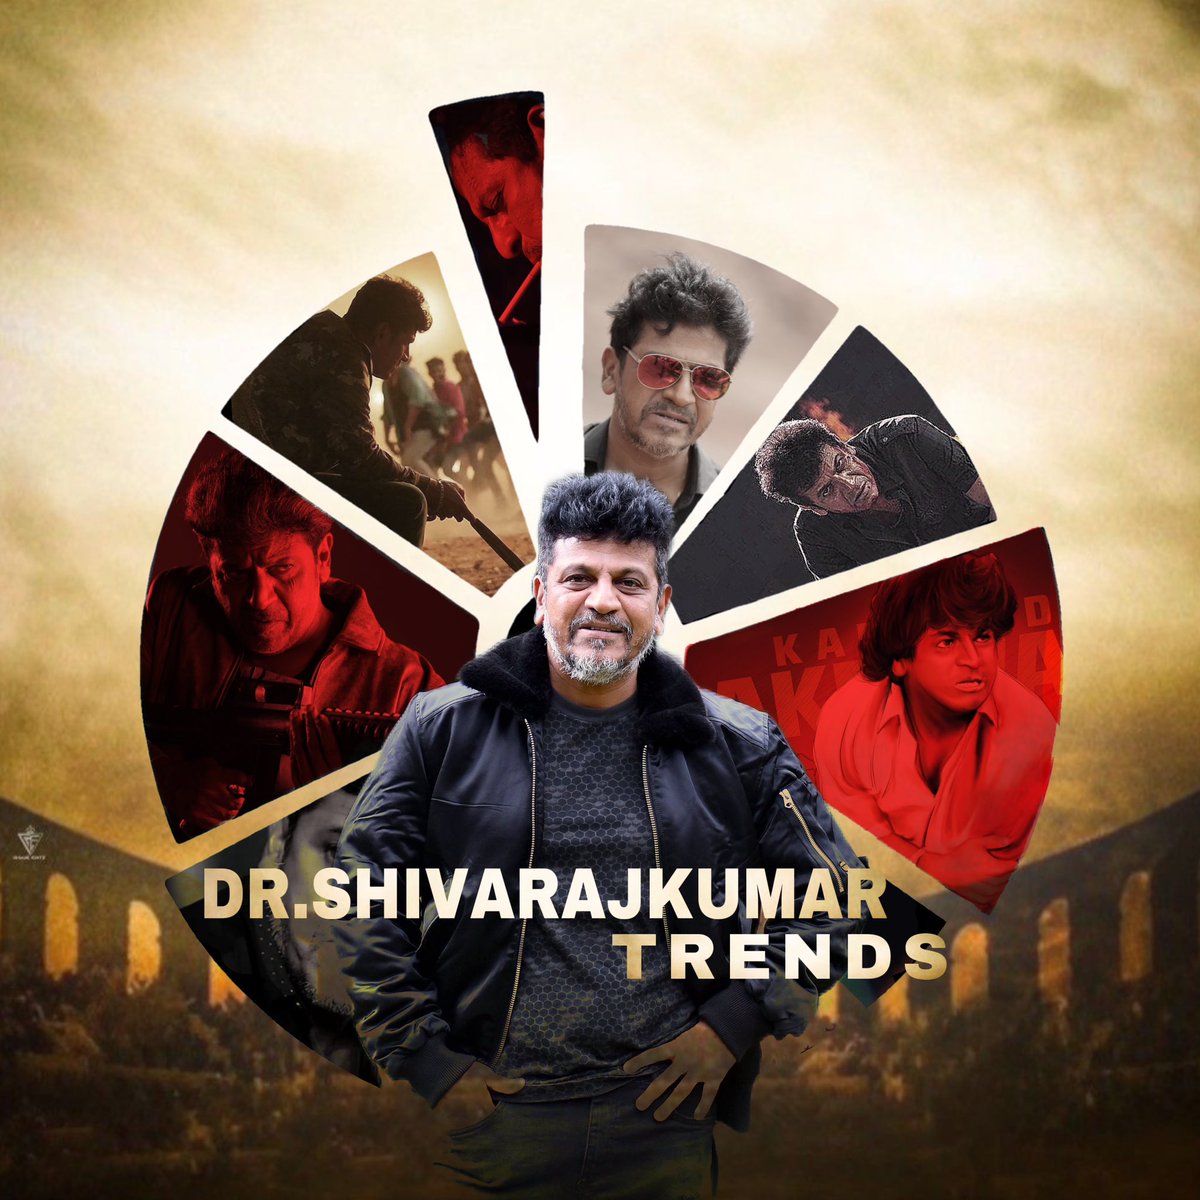 Hailing the Chronicle conqueror who set the trends in cinema @NimmaShivanna 👑  Here's to the man who started it all, unveiling the @ShivannaTrendBU page DP. Join the legacy, ride the trends! 🤗 #DrShivaRajkumar  #DrShivaRajkumarTrends